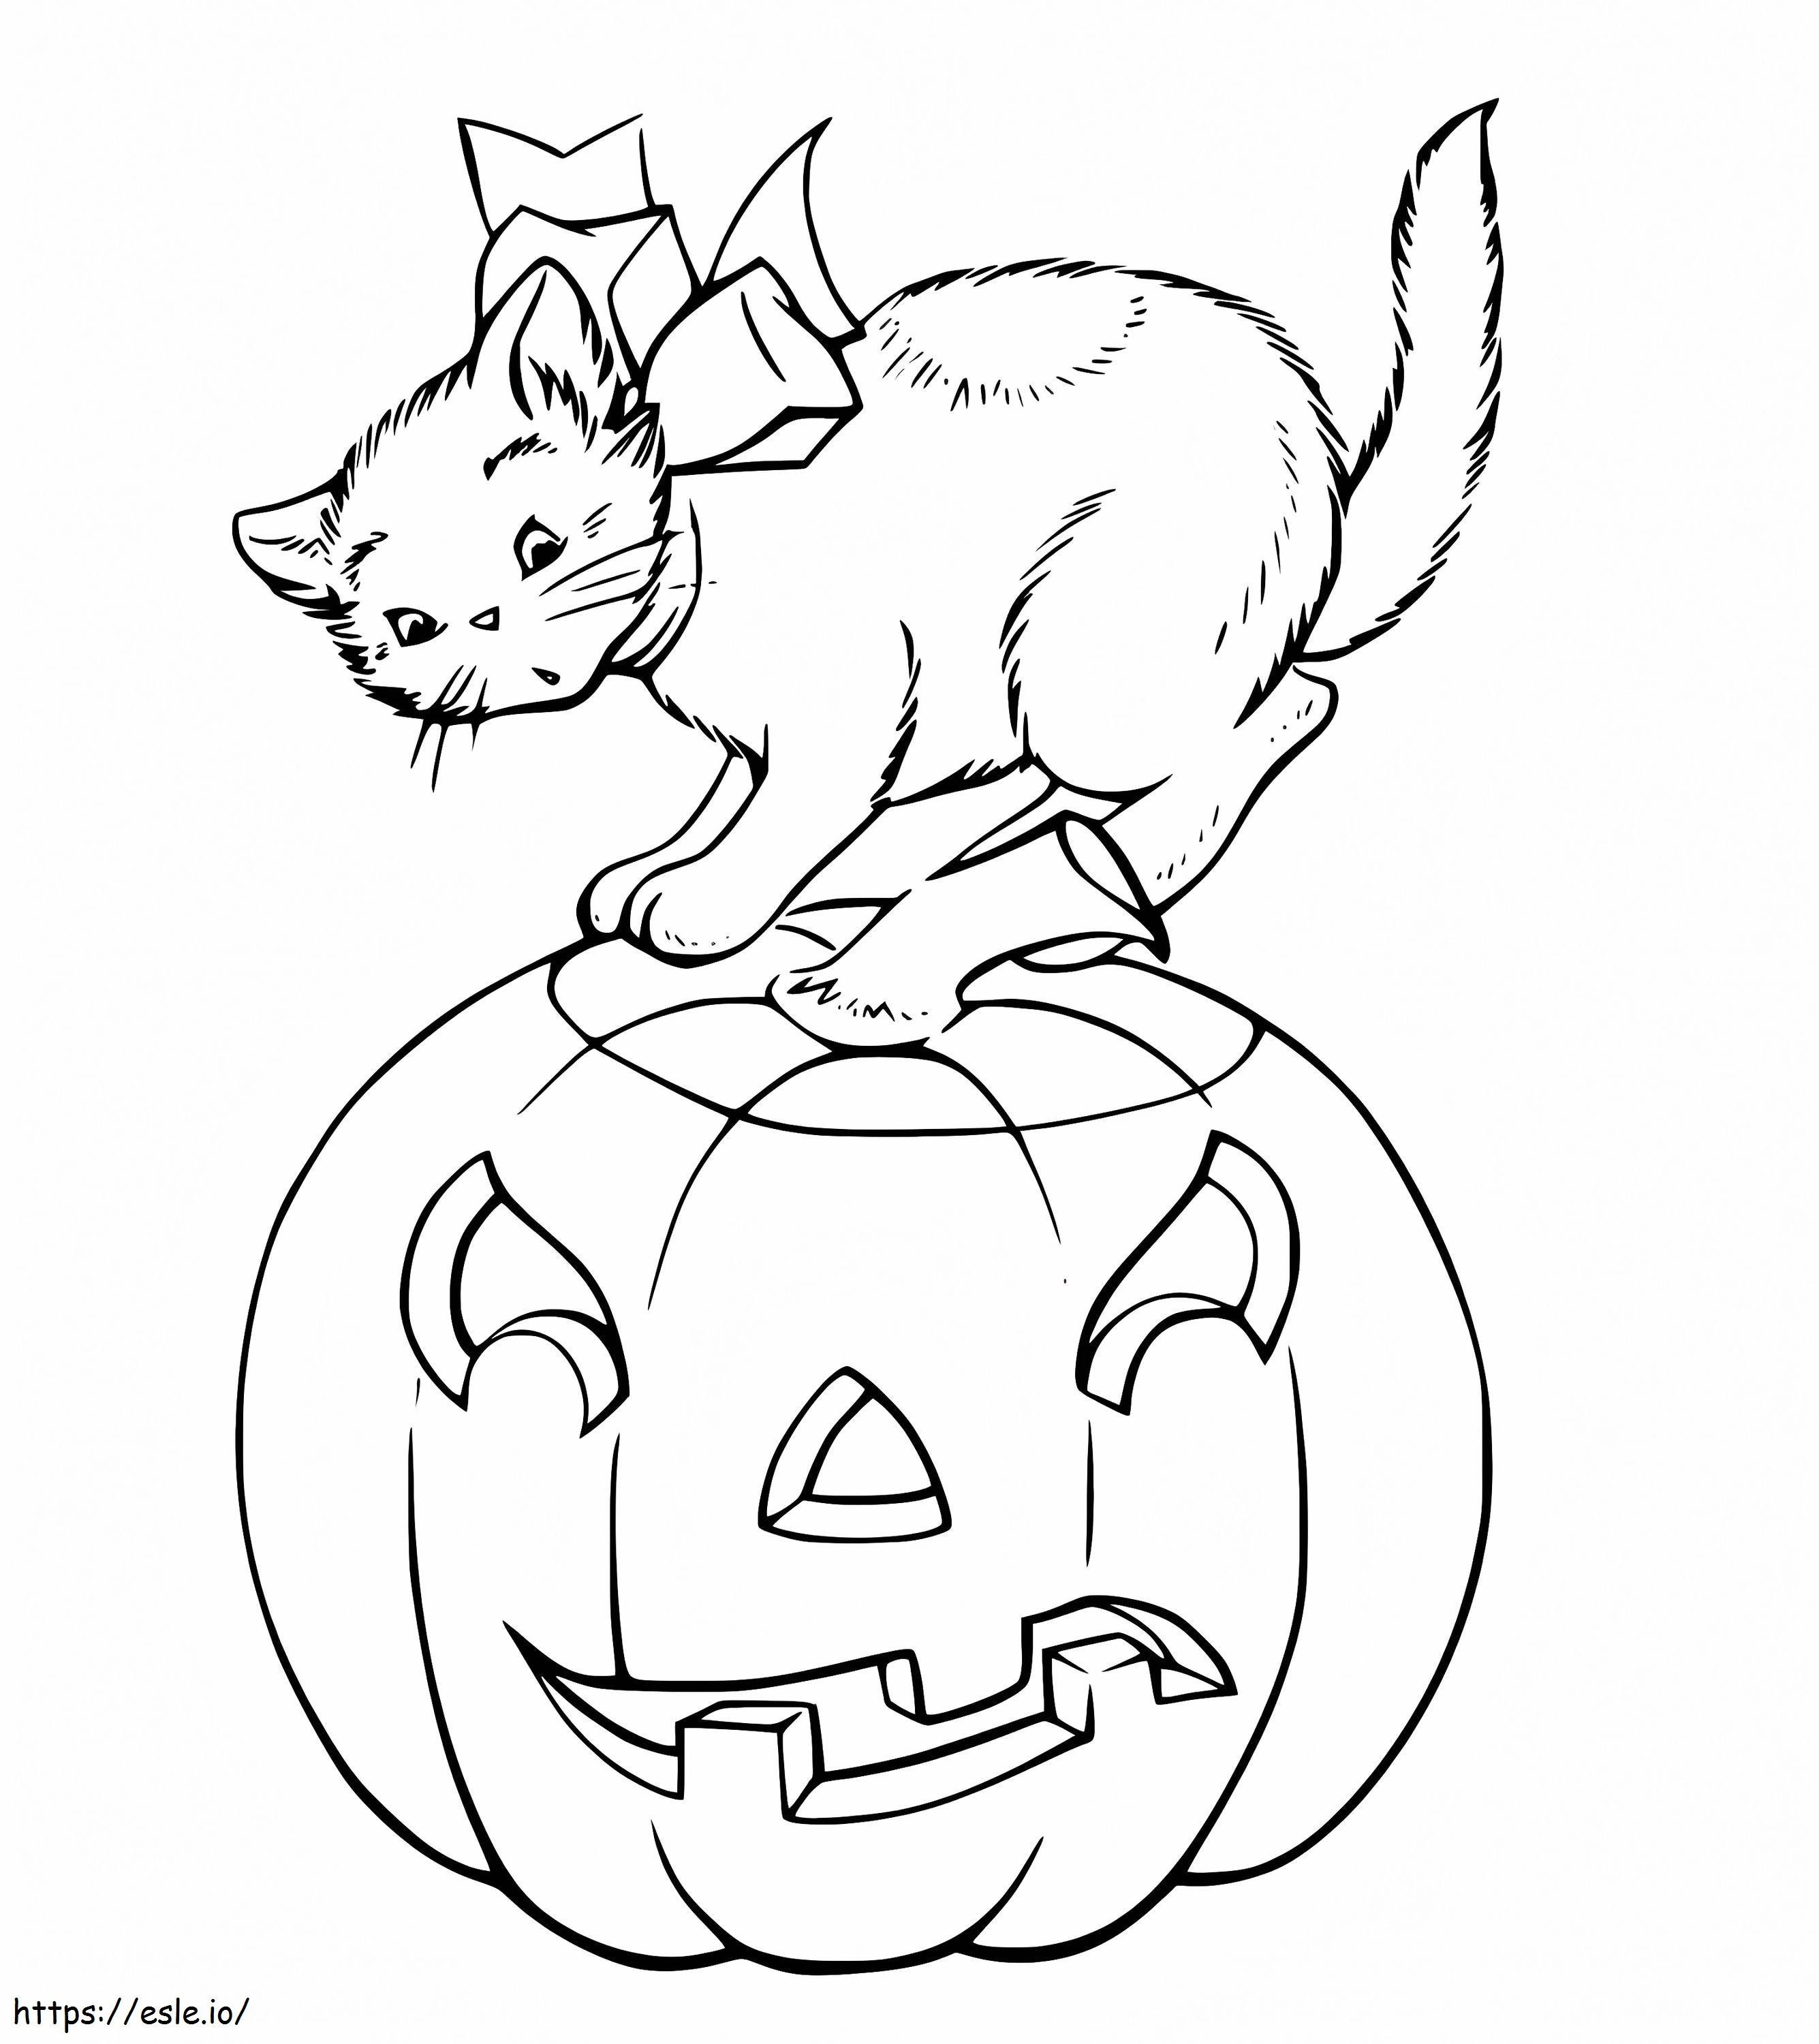 Lovely Halloween Cat coloring page